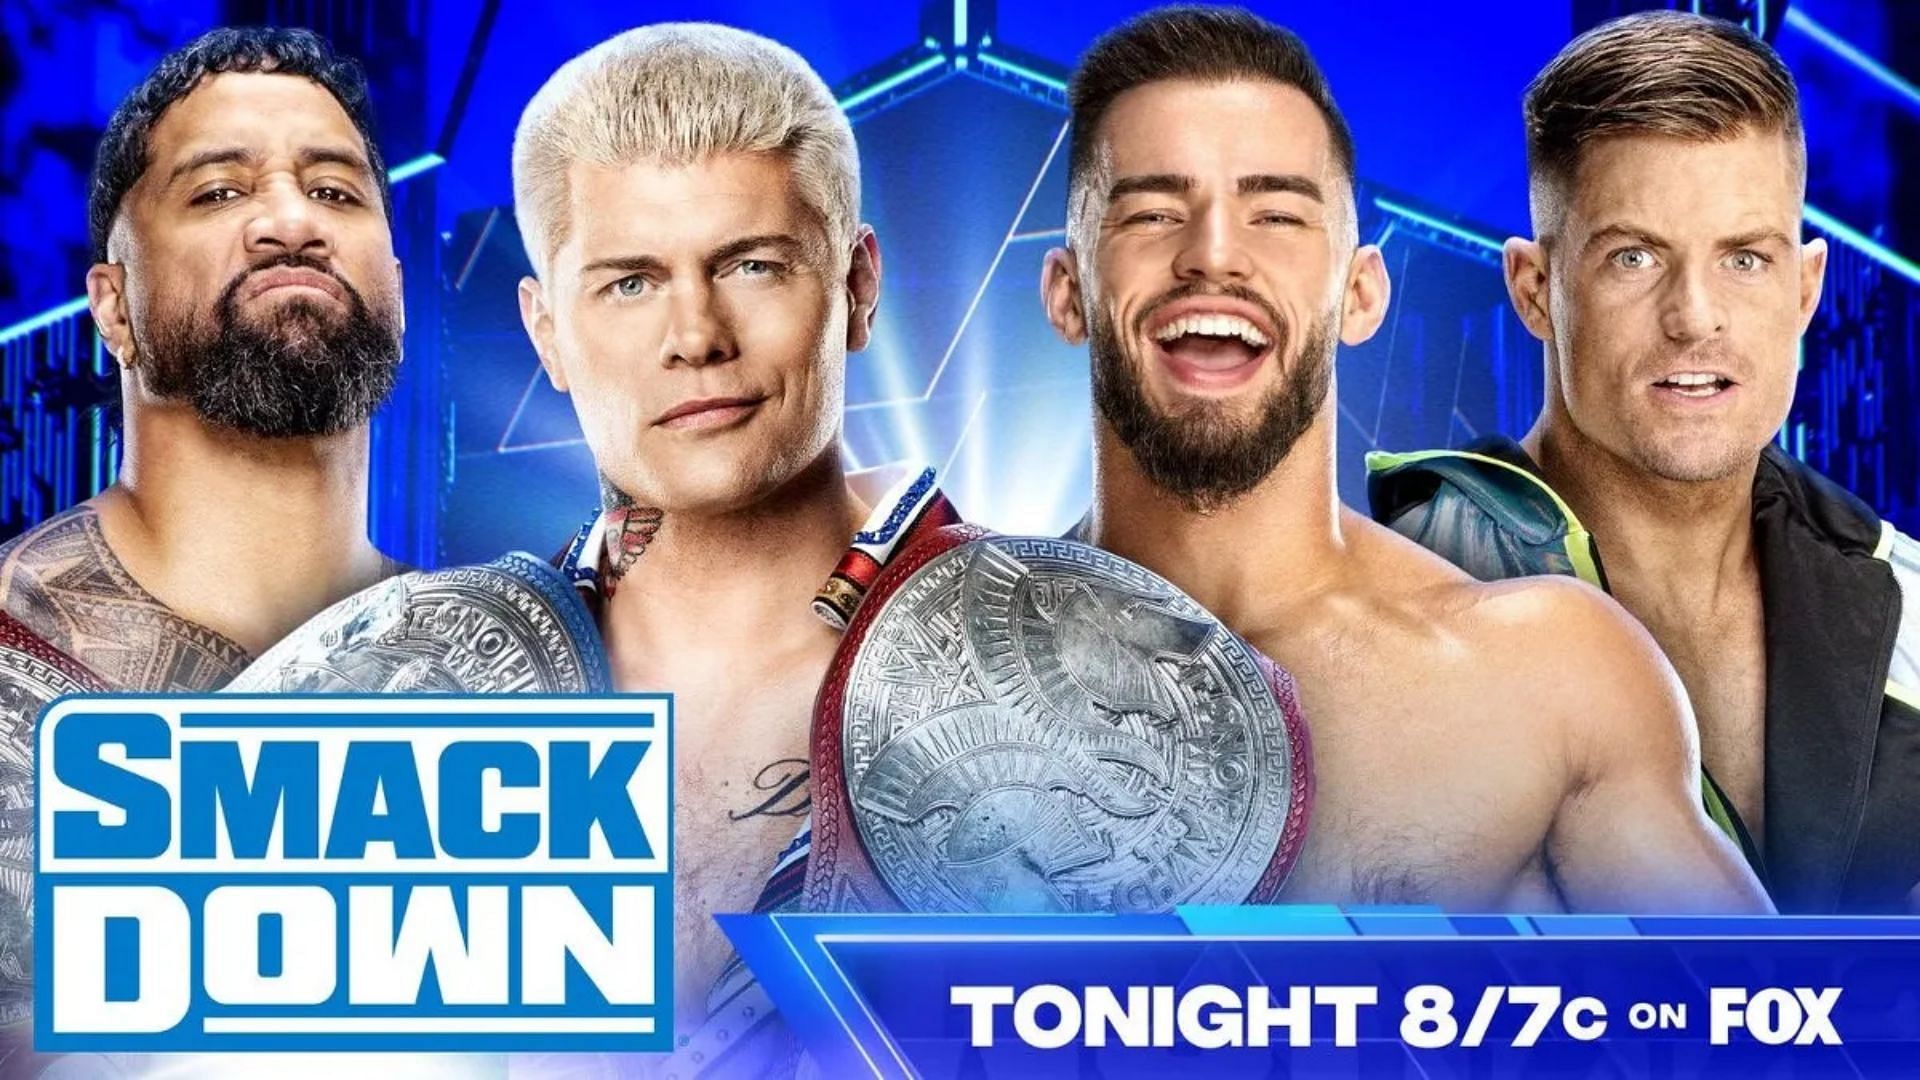 The match is scheduled to take place on Smackdown.